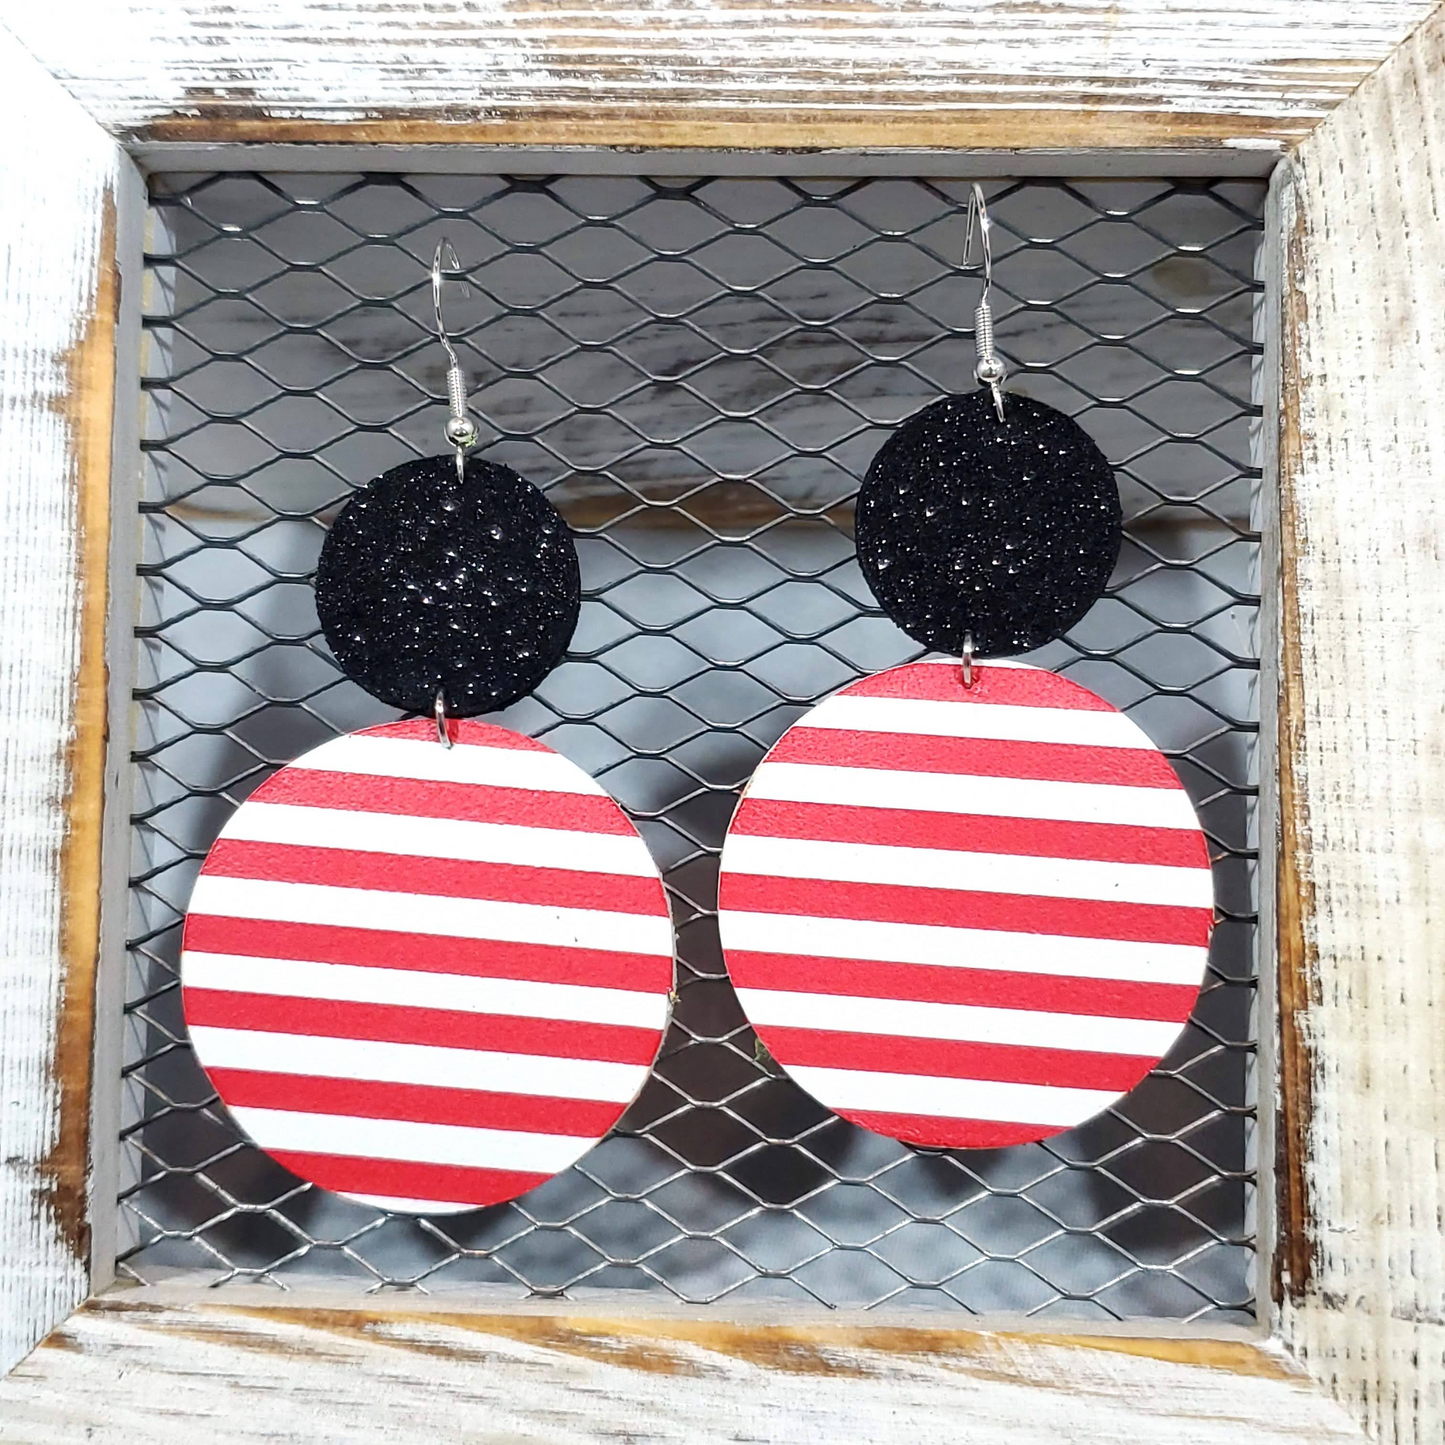 Red/White Stripe Leather Earrings